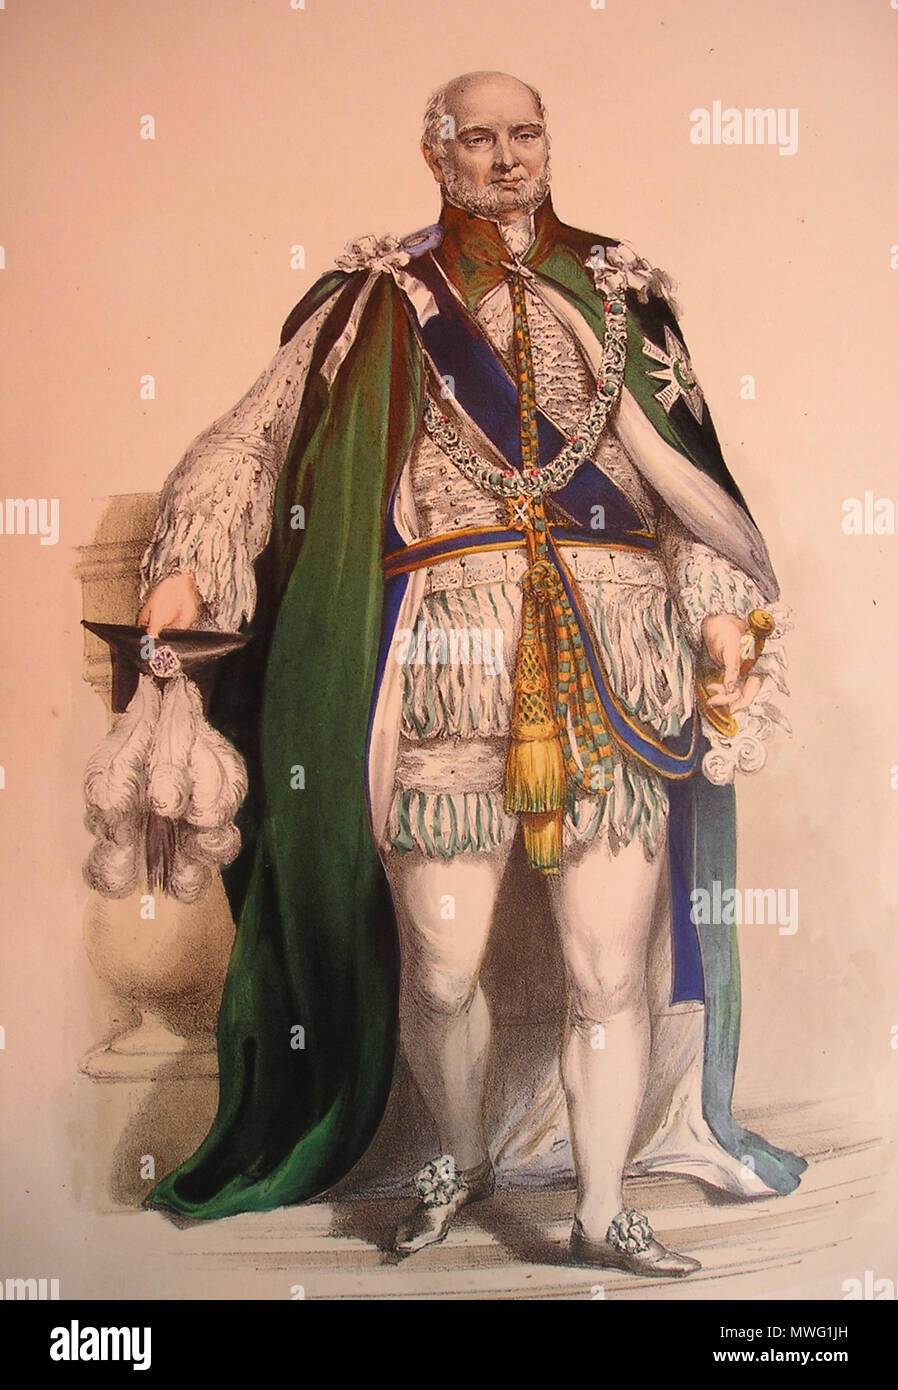 . Prince Augustus Frederick, Duke of Sussex wearing the robes of a Knight Companion of the Order of the Thistle . 17 February 2007. Artist: G.E. Madeley (fl.1826–1841, date of death unknown). Photograph by User:Dr pda 342 Knight of the Order of the Thistle Stock Photo